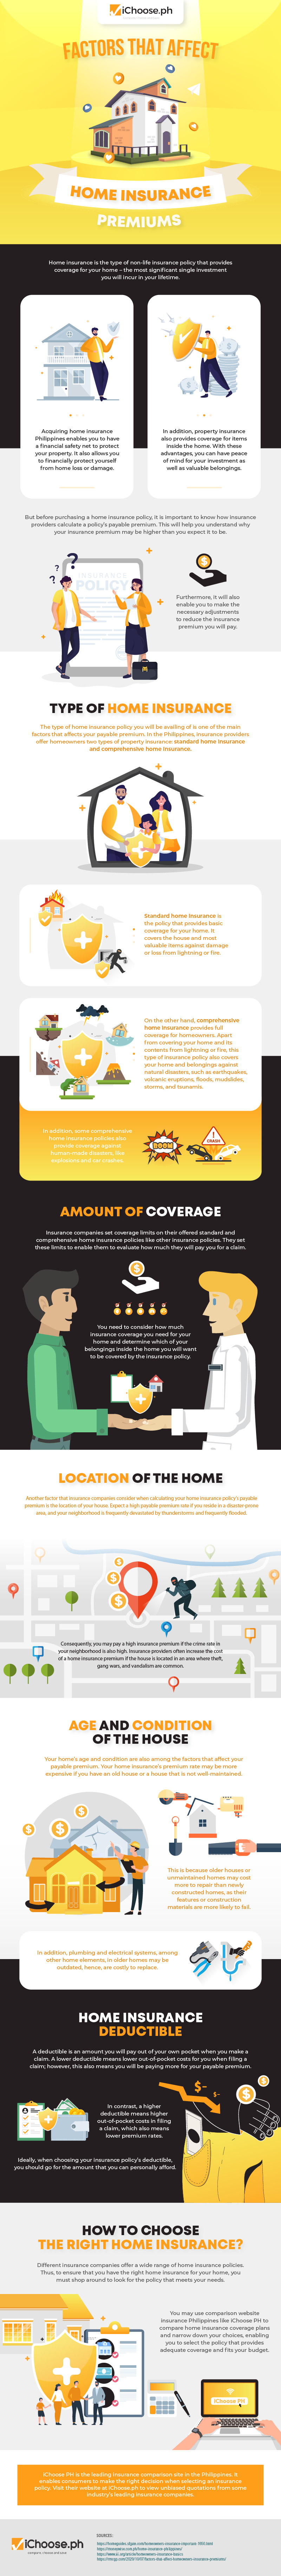 Factors-that-Affect-Home-Insurance-Premiums-Infographic